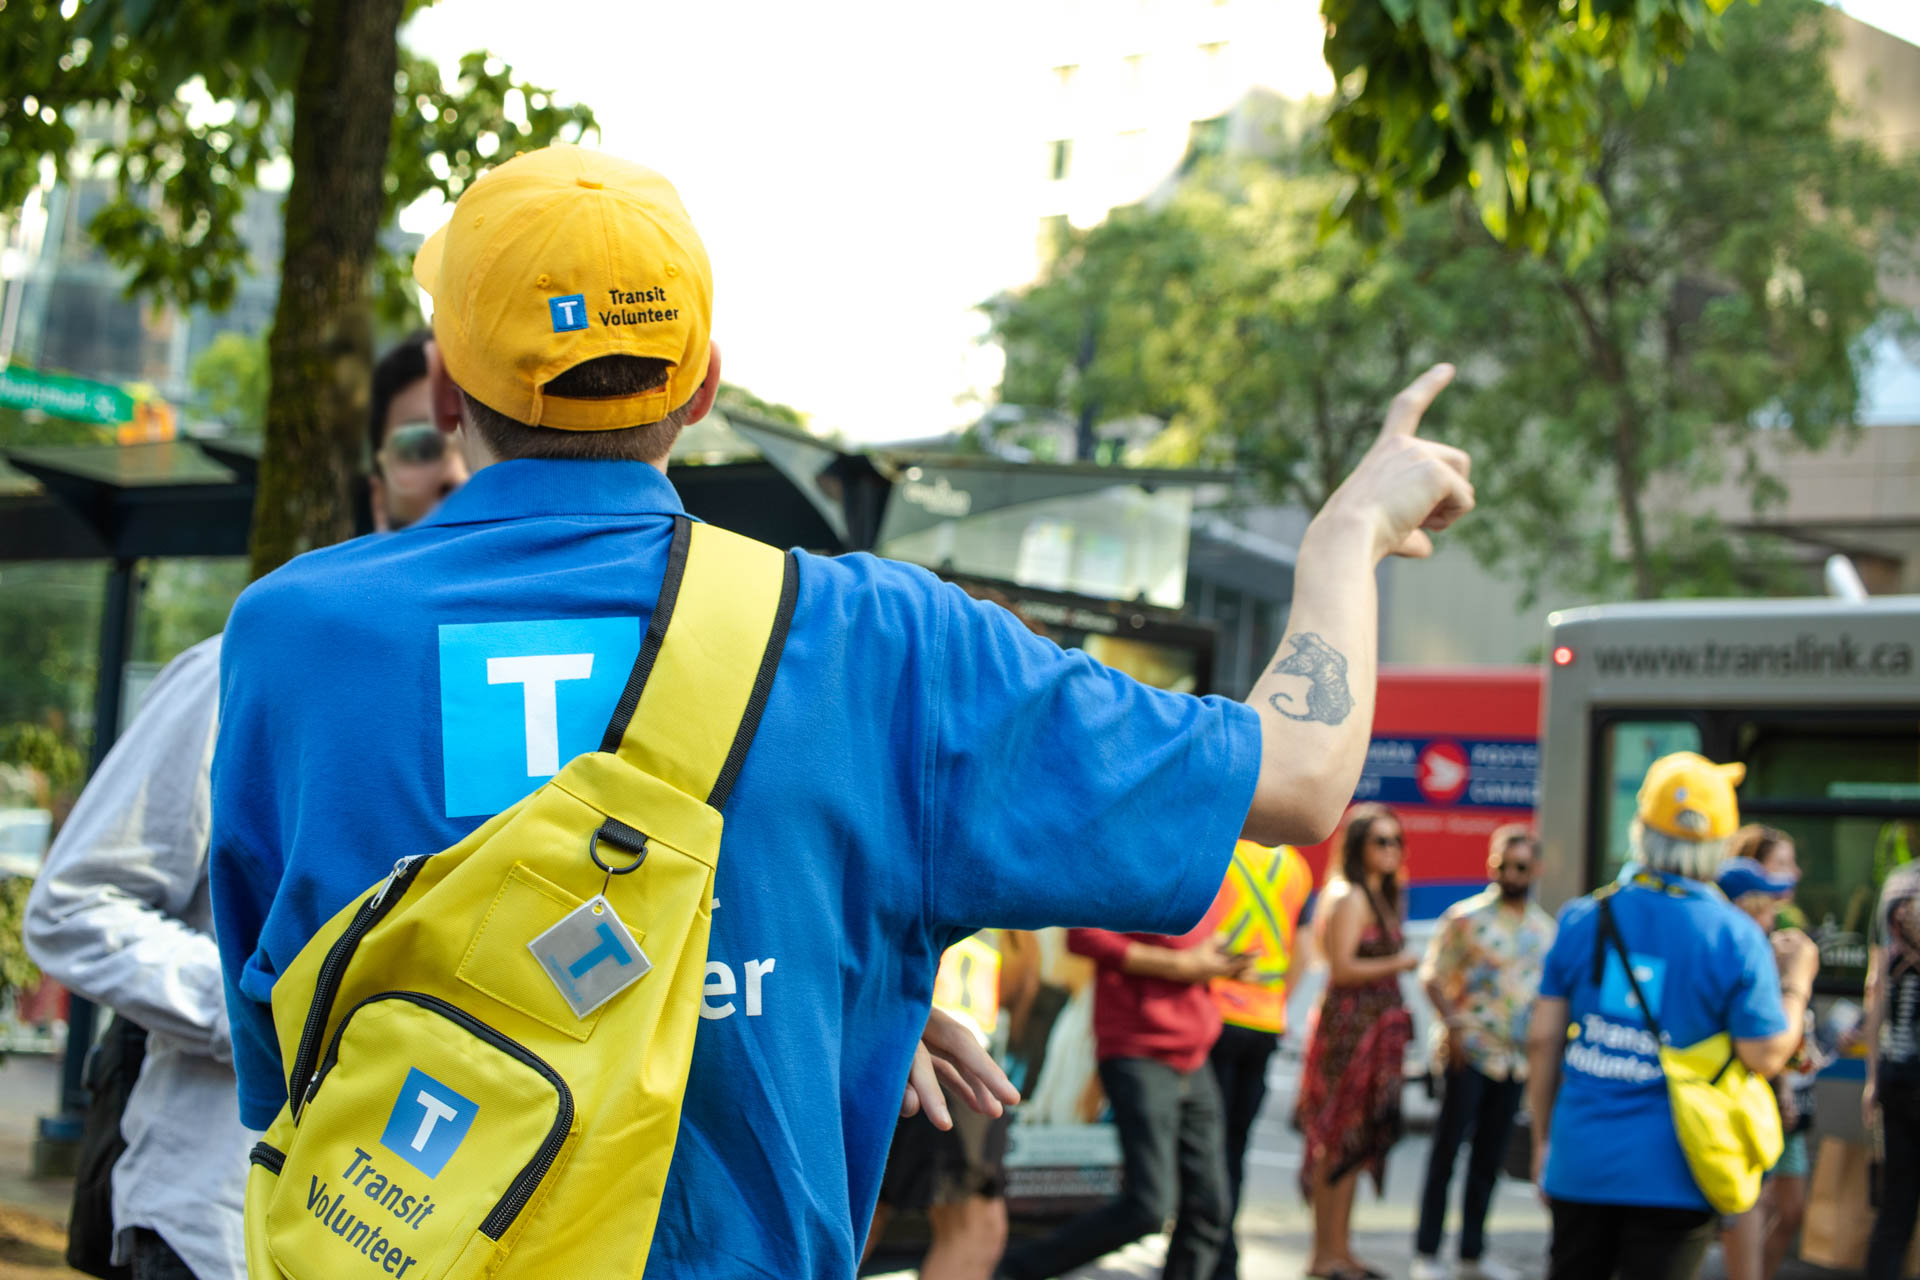 A TransLink Volunteer is shown from the back as he points out directions to a customer